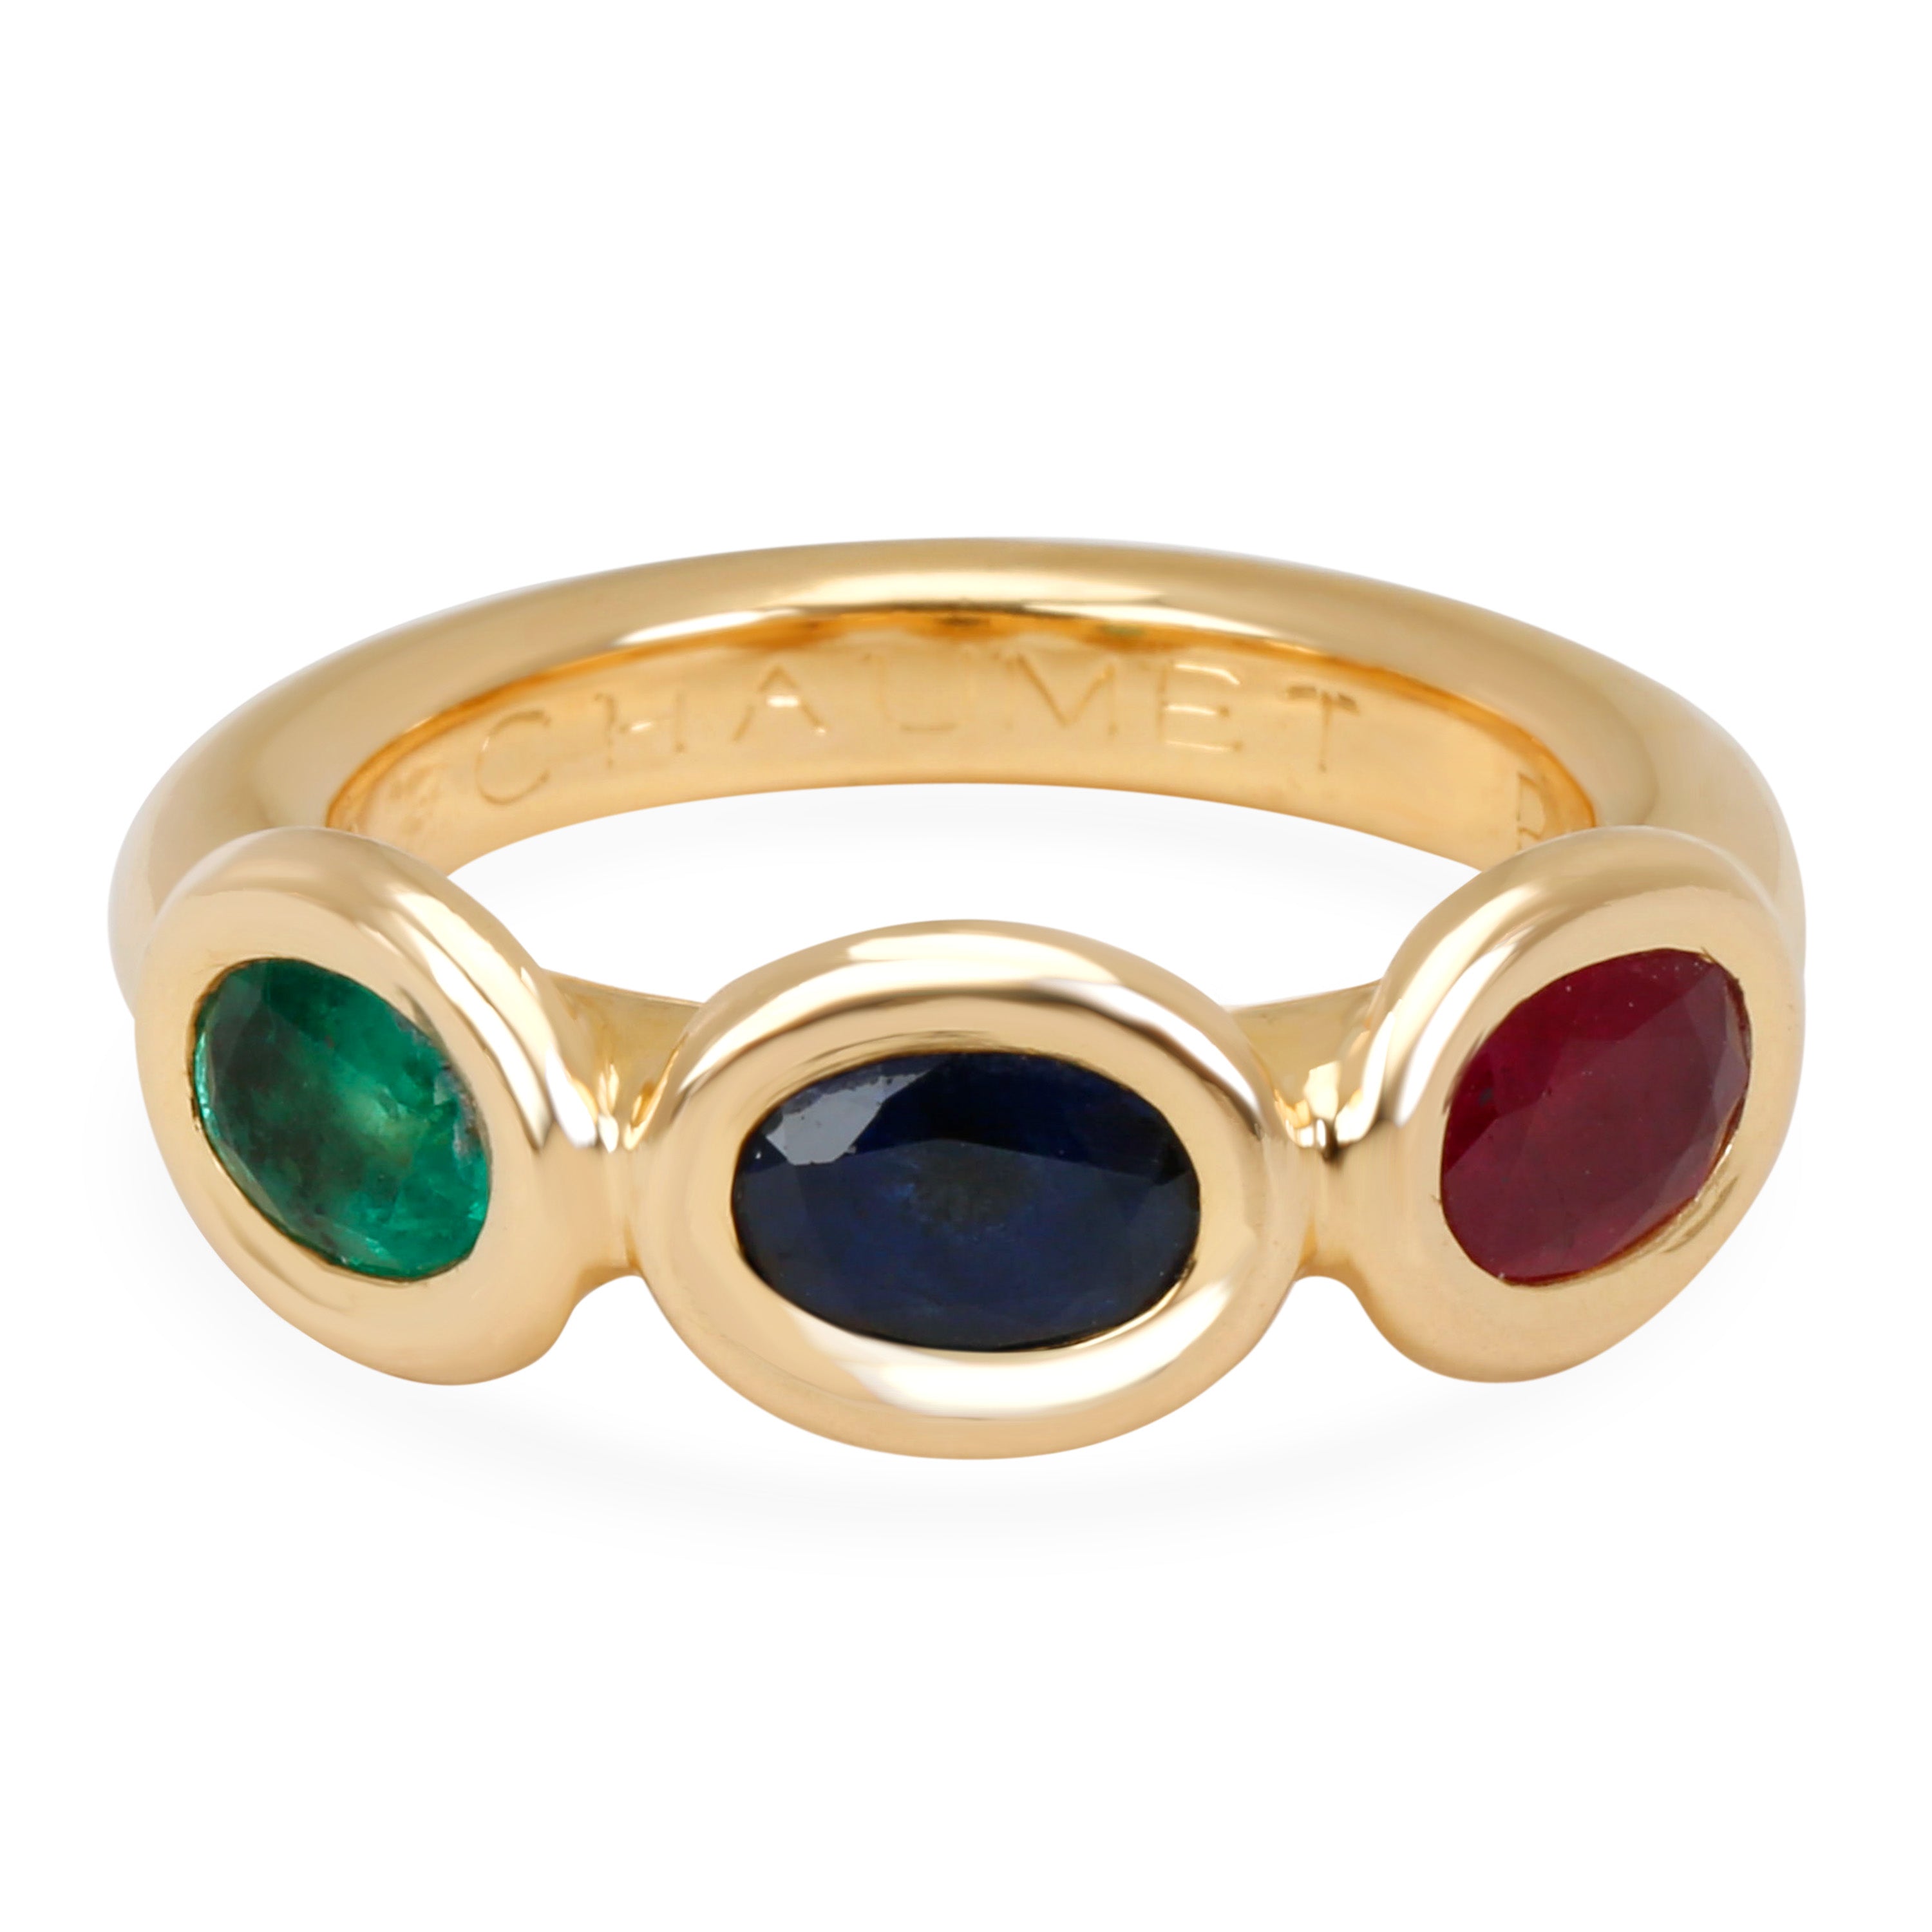 Gold ring - Rings in gold, diamond or gemstones - Chaumet